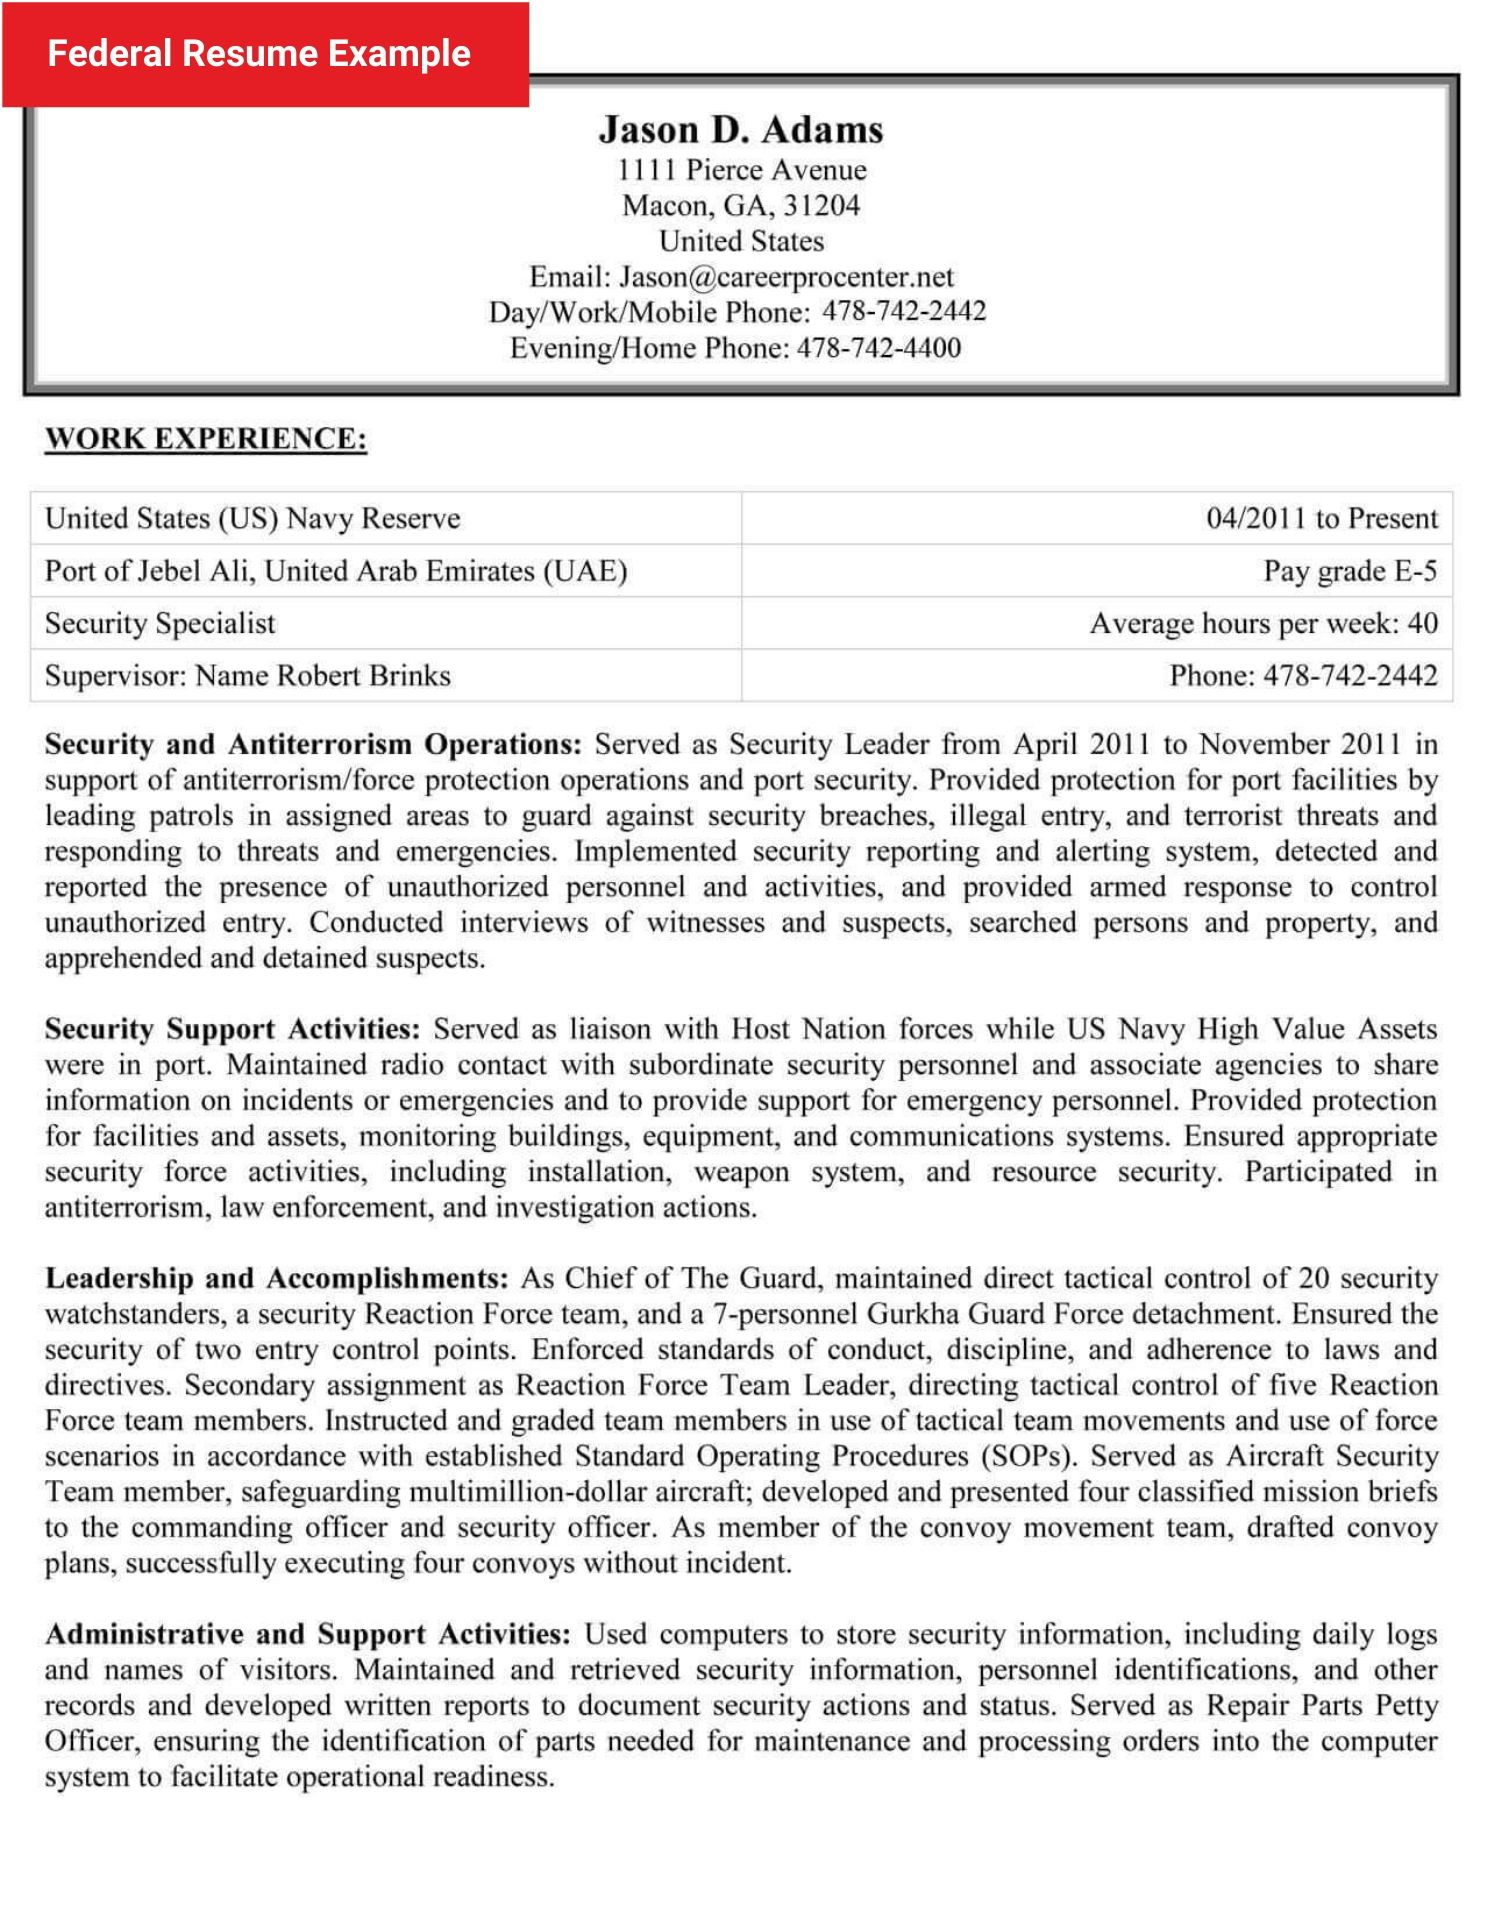 Resume Sample From A Air force Veteran 7 Free Federal Resume Samples & Writing Tips and Trends